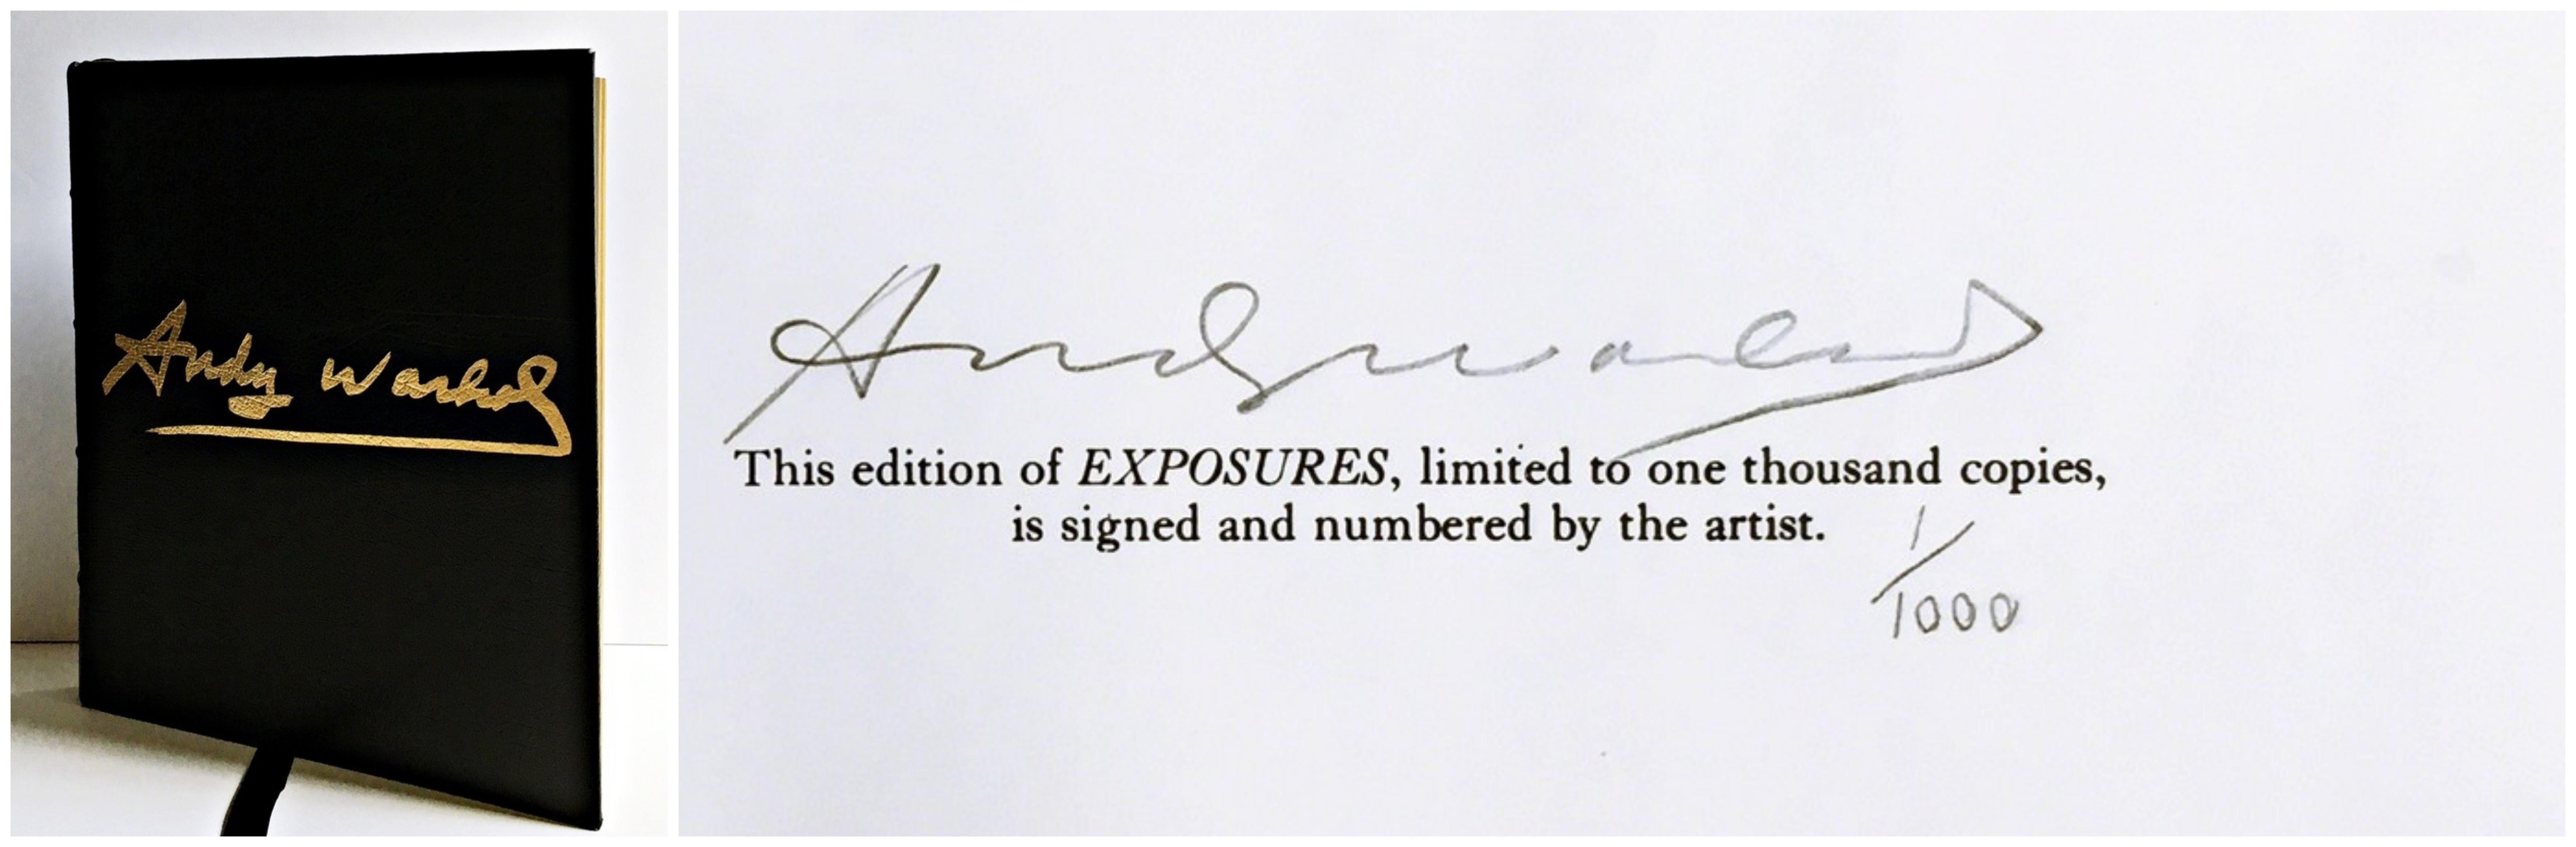 Exposures (Deluxe Edition) Hand Signed and Numbered by Andy Warhol, Official COA